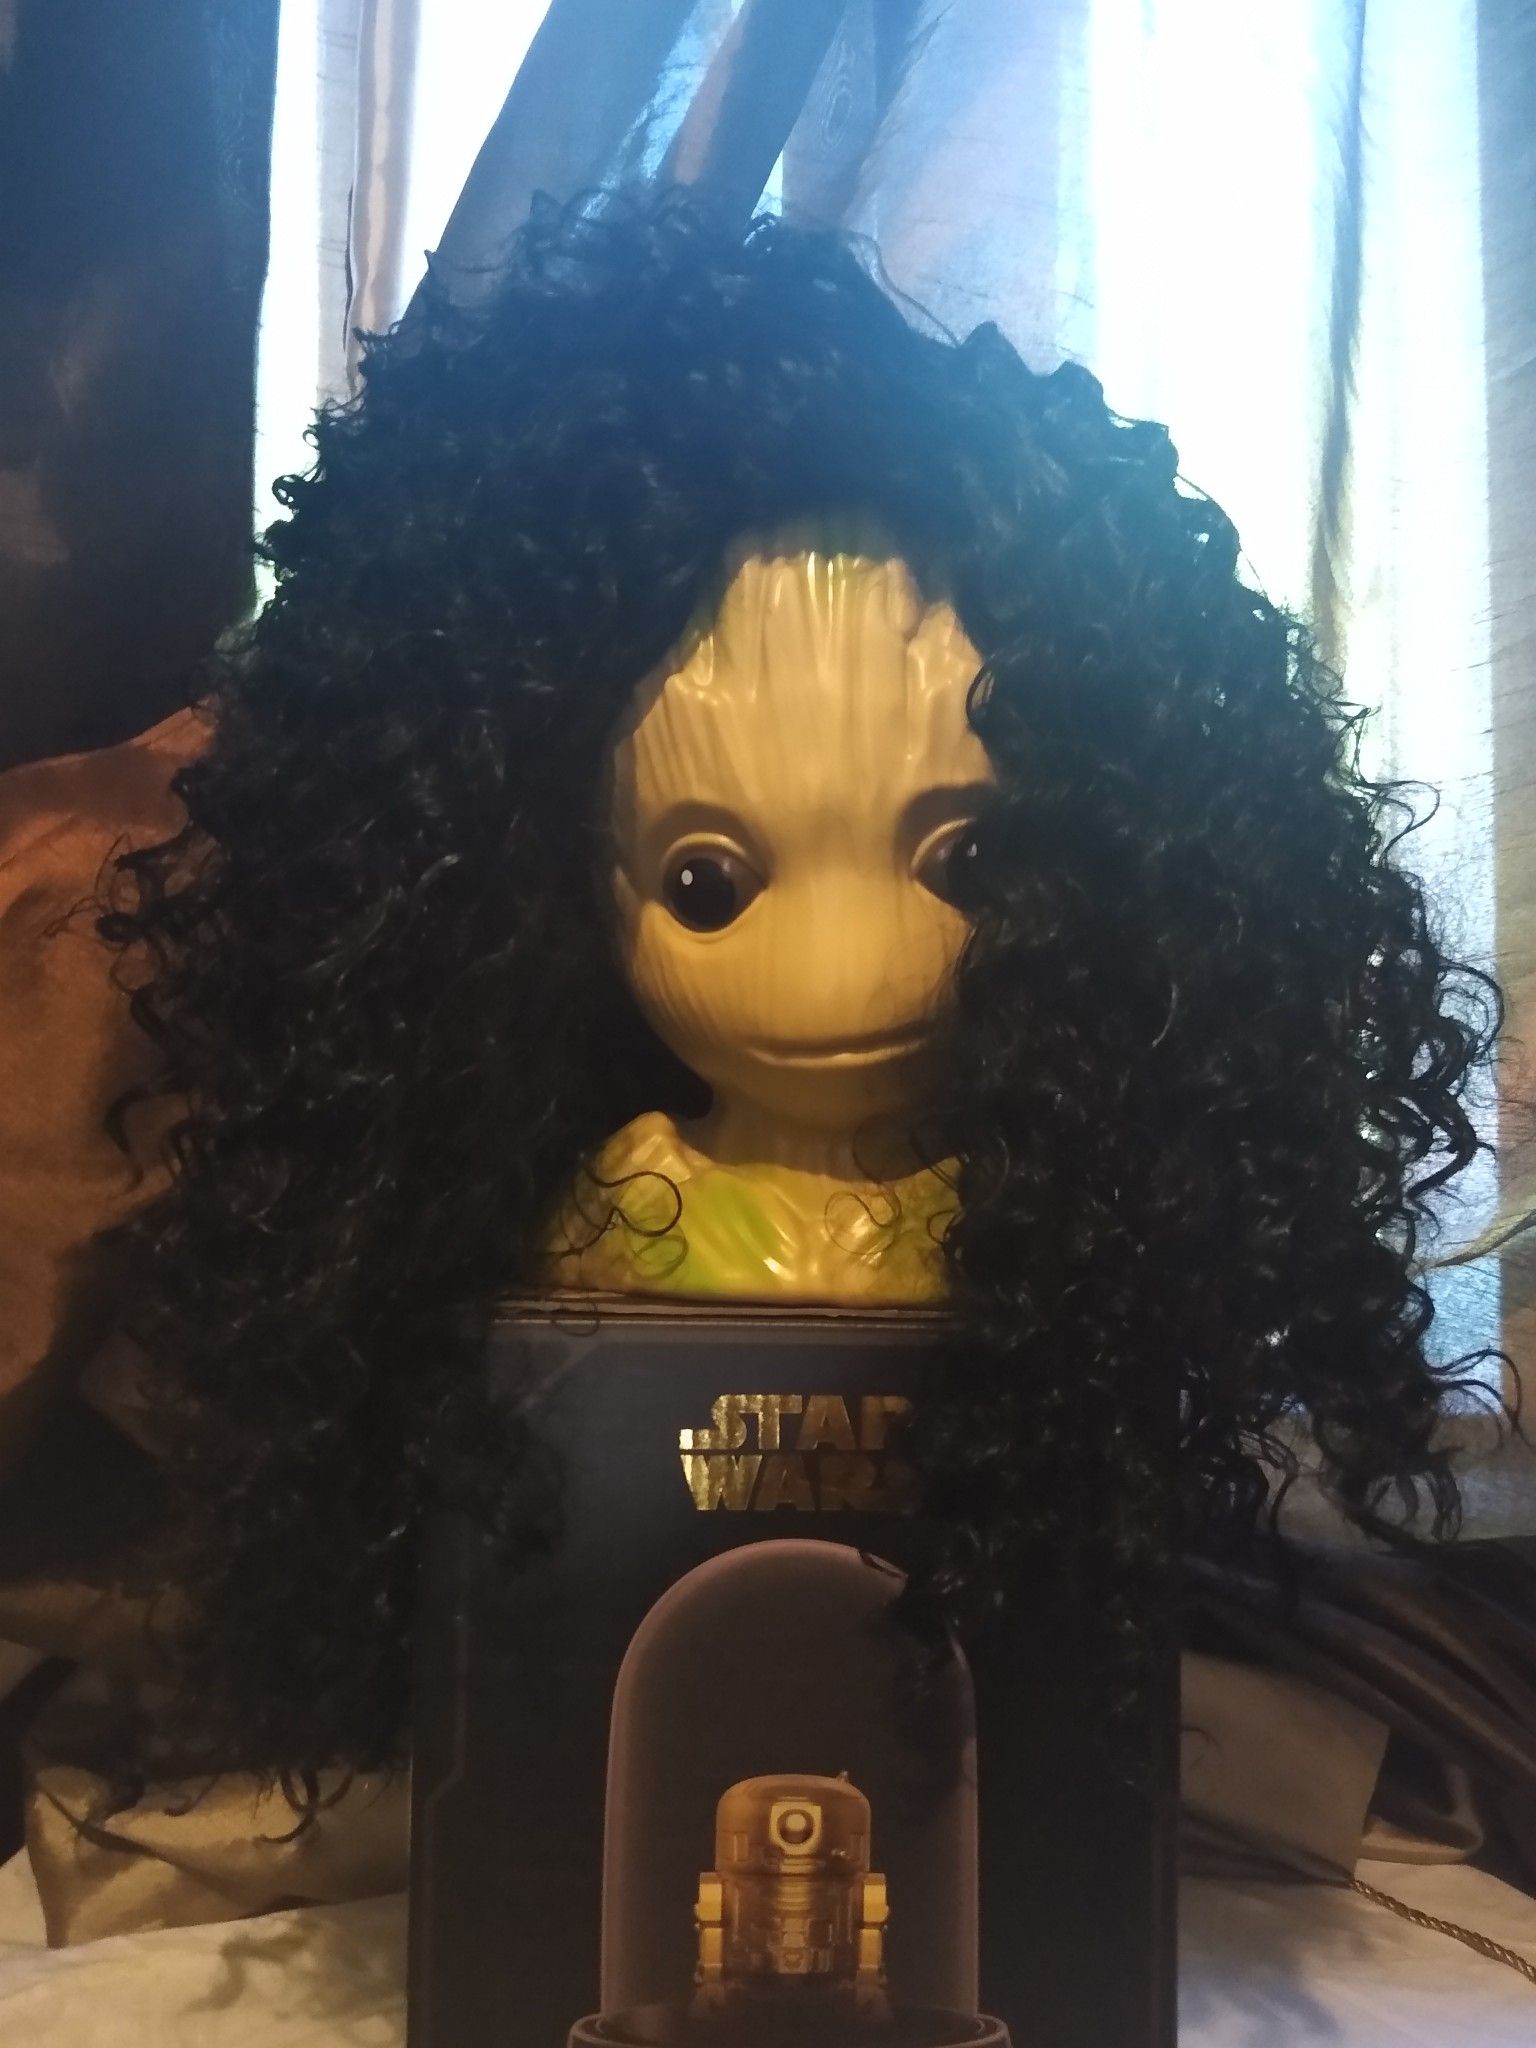 Black brown wig curly thick hair $20 new in city of bell gardens